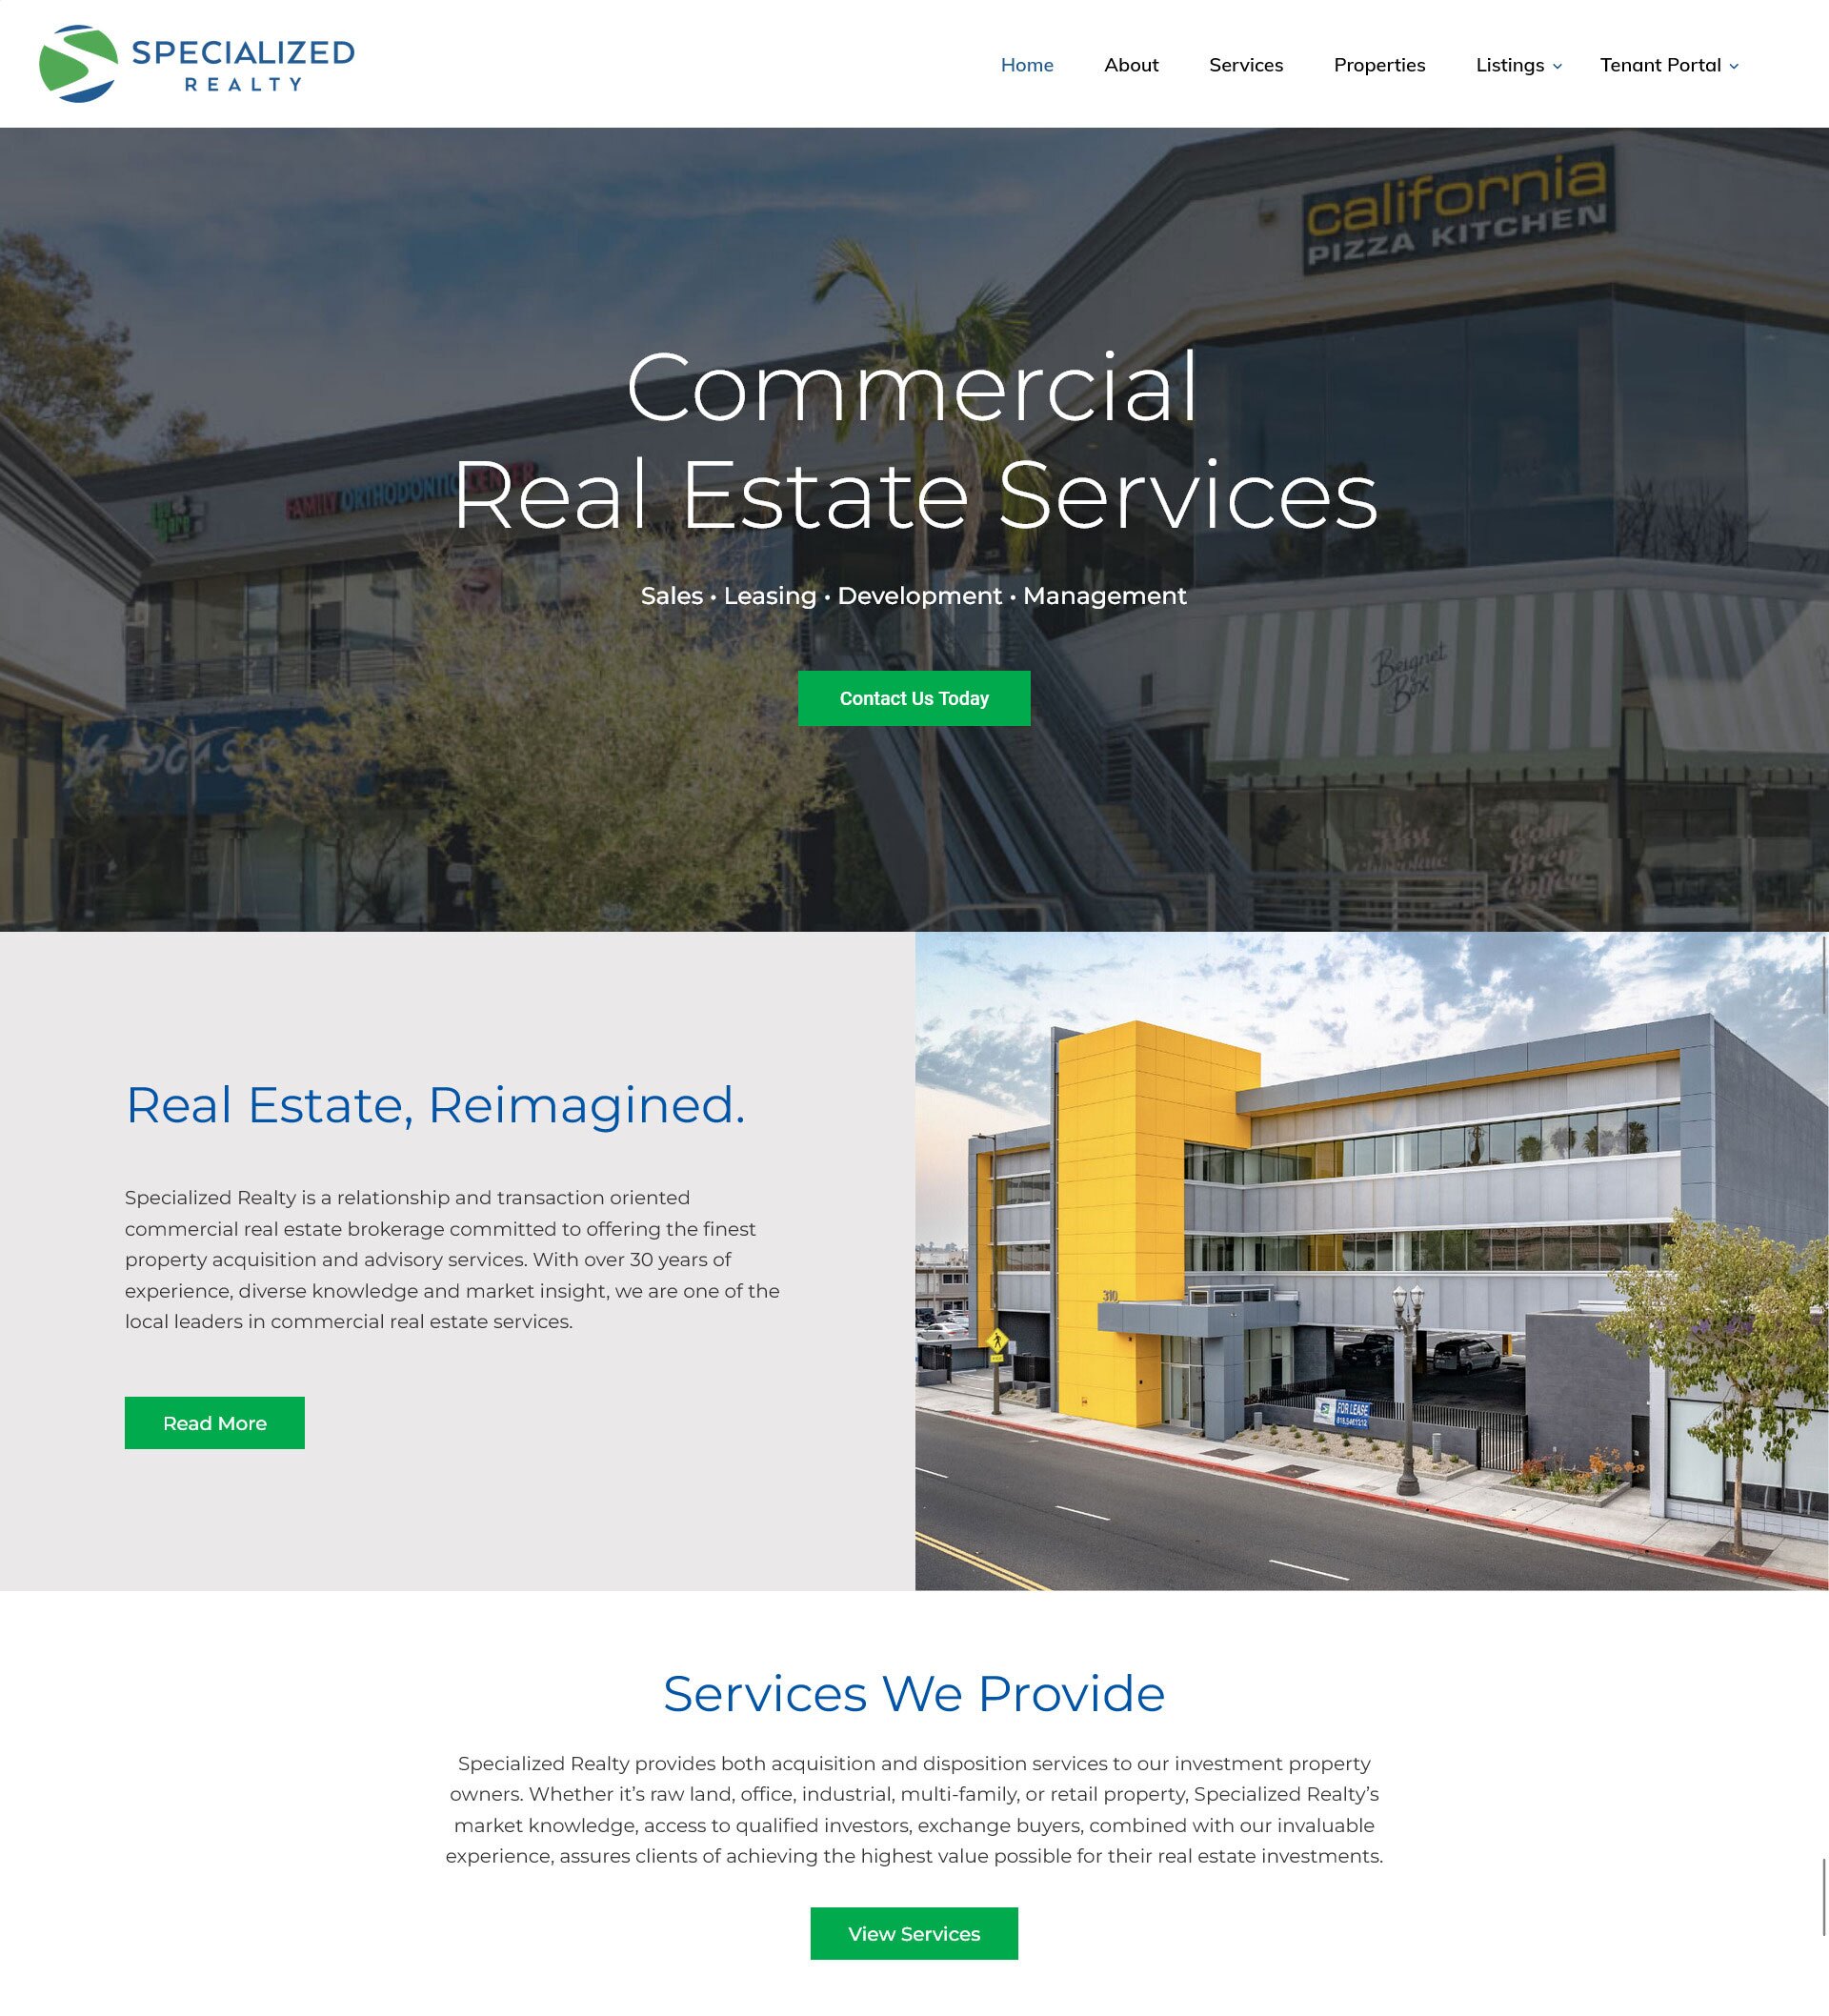 Specialized Realty